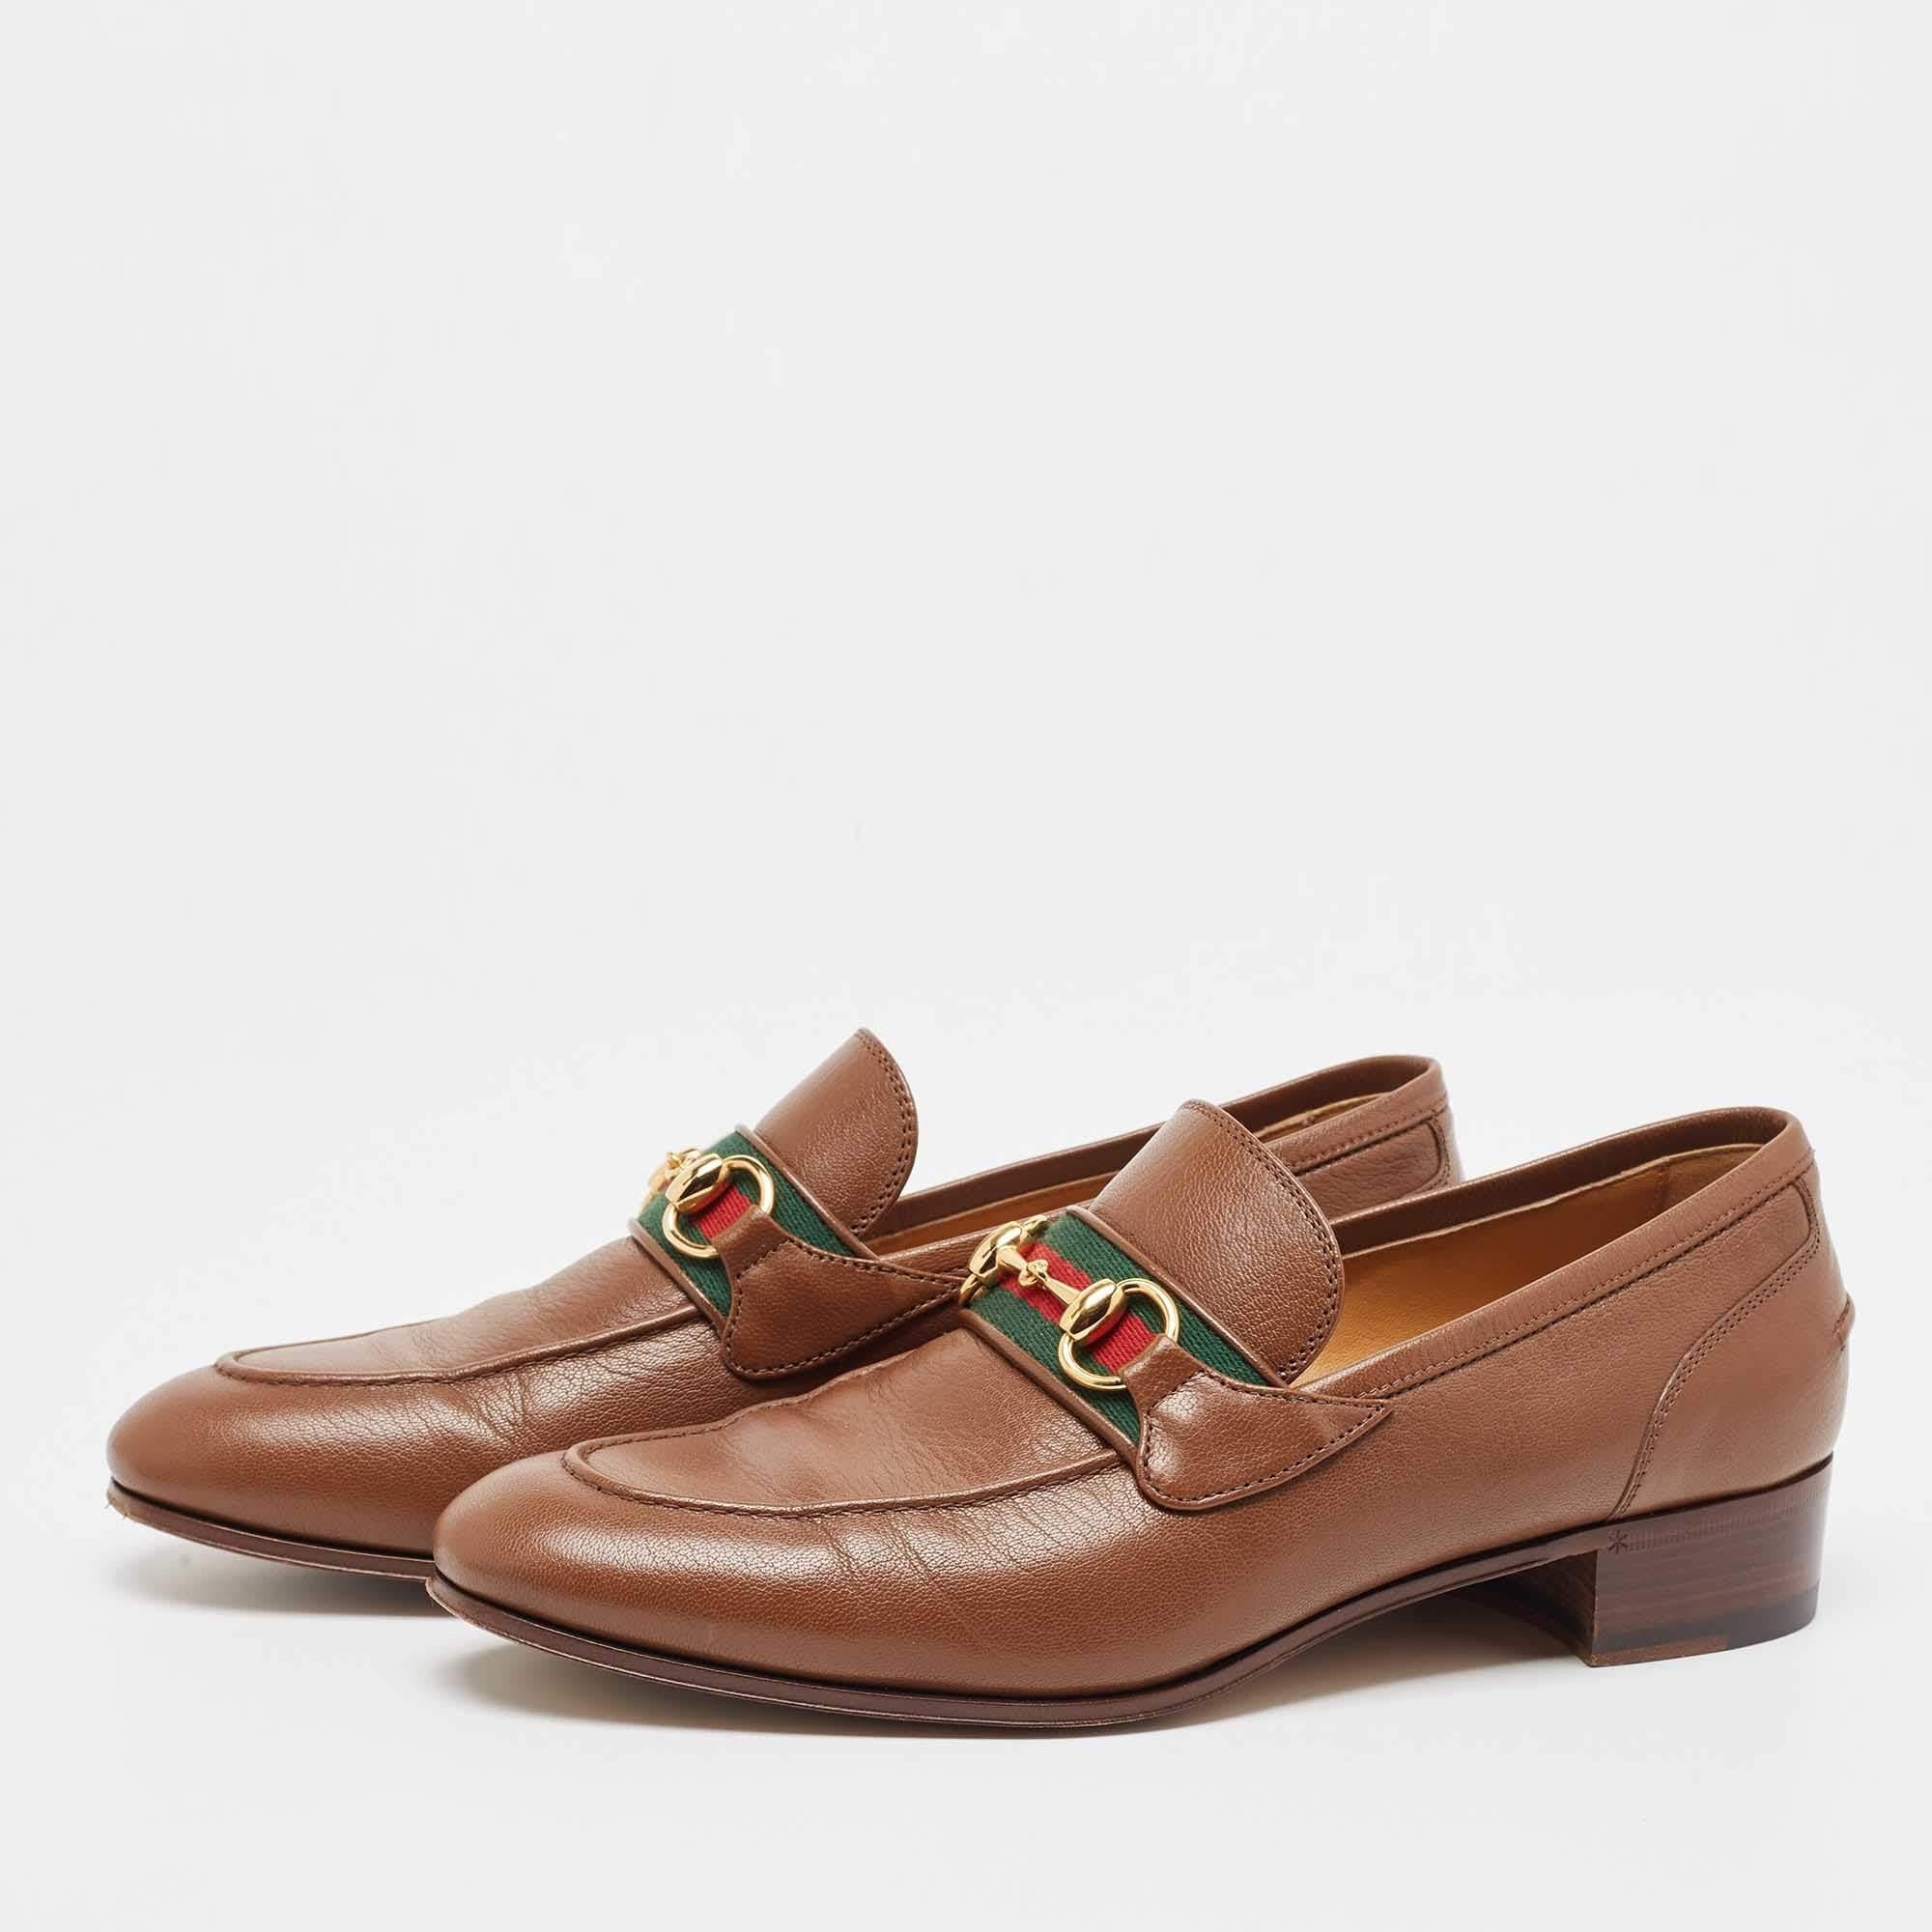 To perfectly complement your attires, we bring you this pair of loafers that speak nothing but style. The shoes have been crafted with skill and are designed to be easy to slip on. They are just the right choice to complement your fashionable side.

